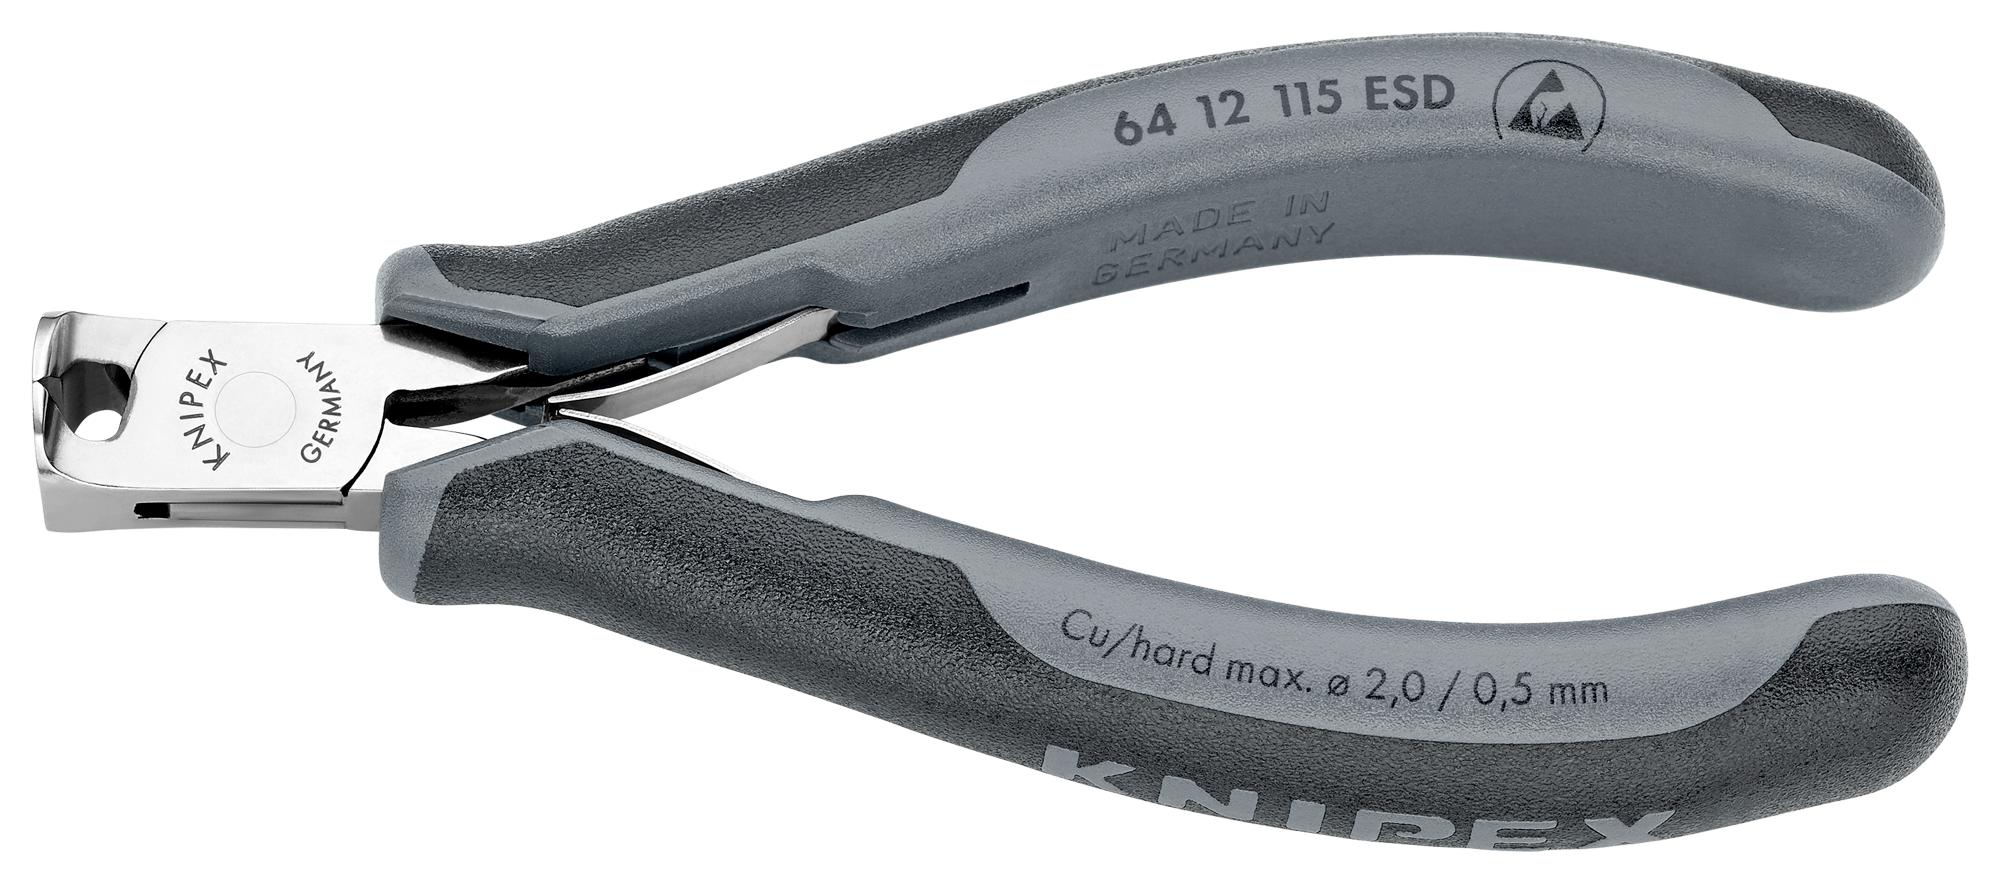 64 12 115 ESD END CUTTING NIPPERS KNIPEX